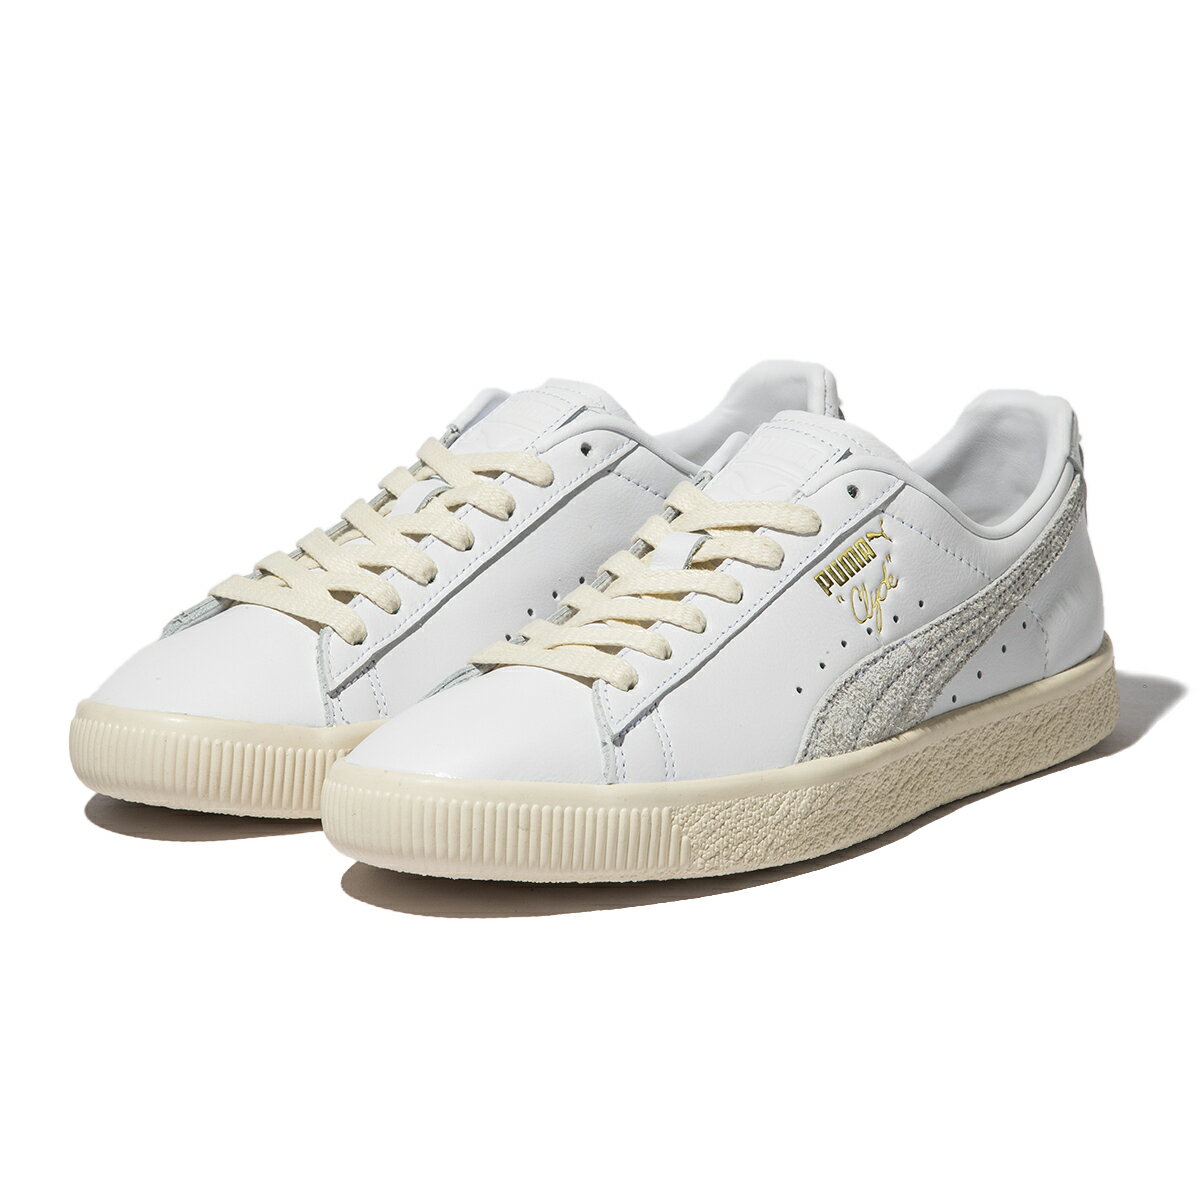 PUMA CLYDE BASE(PUMA WHITE-FROSTED IVORY-PUM)(プーマ クライド BASE)